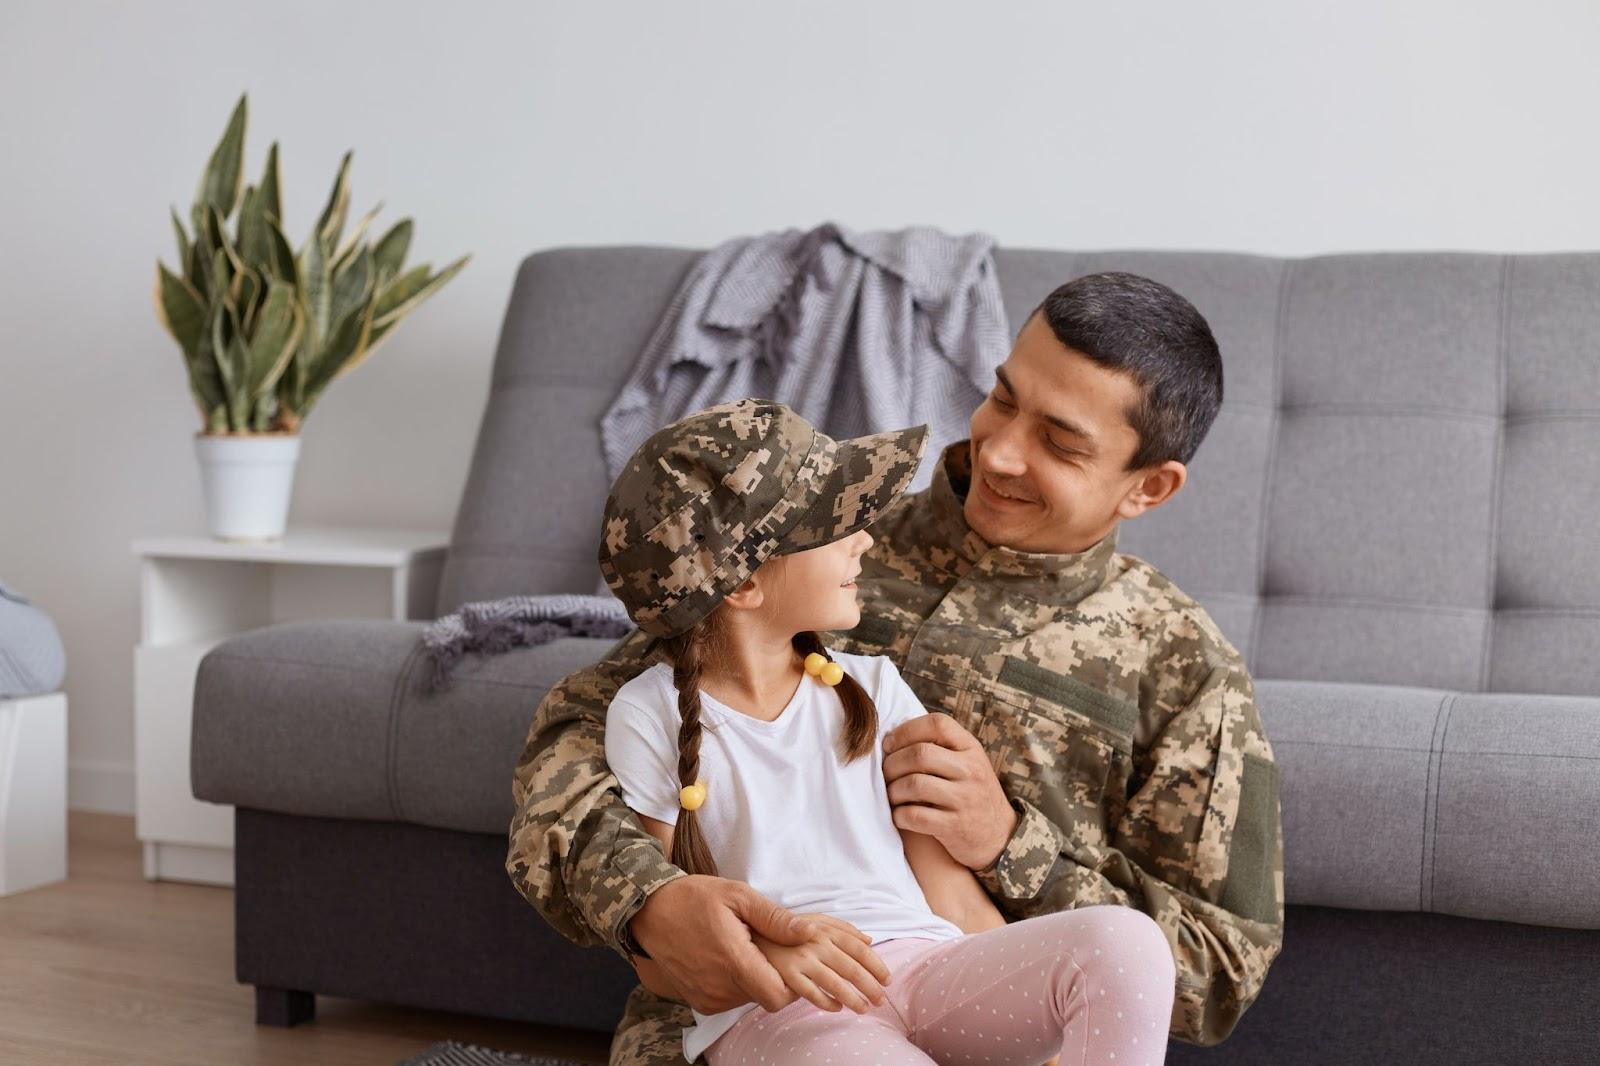 A soldier in a camouflage uniform smiles at a young girl wearing a matching cap, sitting on his lap in a cozy living room, reflecting on the challenges ahead with his military divorce lawyer.